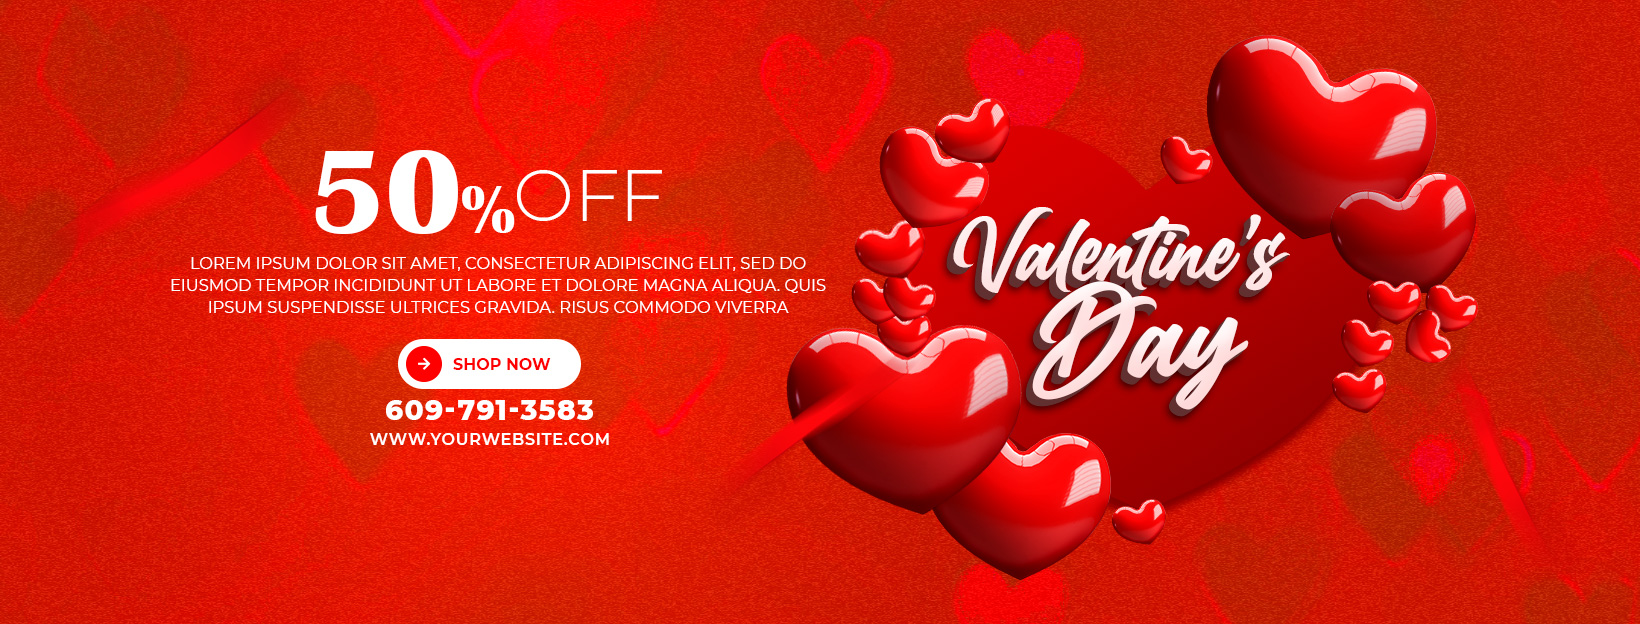 Free Download Happy Valentines Day Discount Sale Facebook Cover Full PSD Shared by Pixahunt 